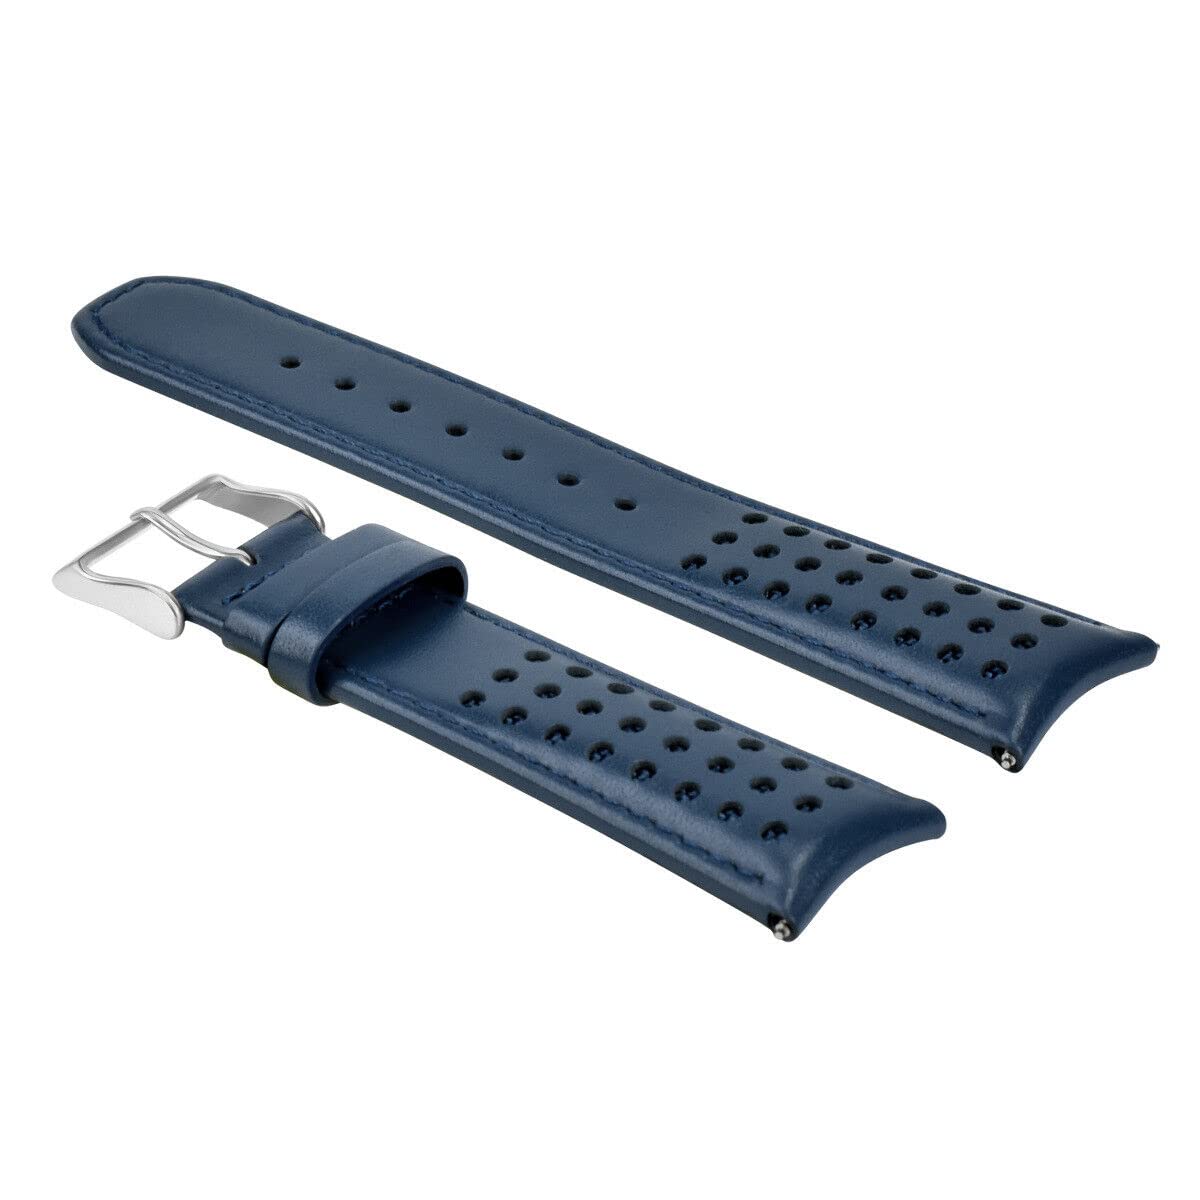 Ewatchparts 23MM WATCH BAND AT8020-03L H800-S081165 BLUE ANGELS LEATHER STRAP COMPATIBLE WITH CITIZEN